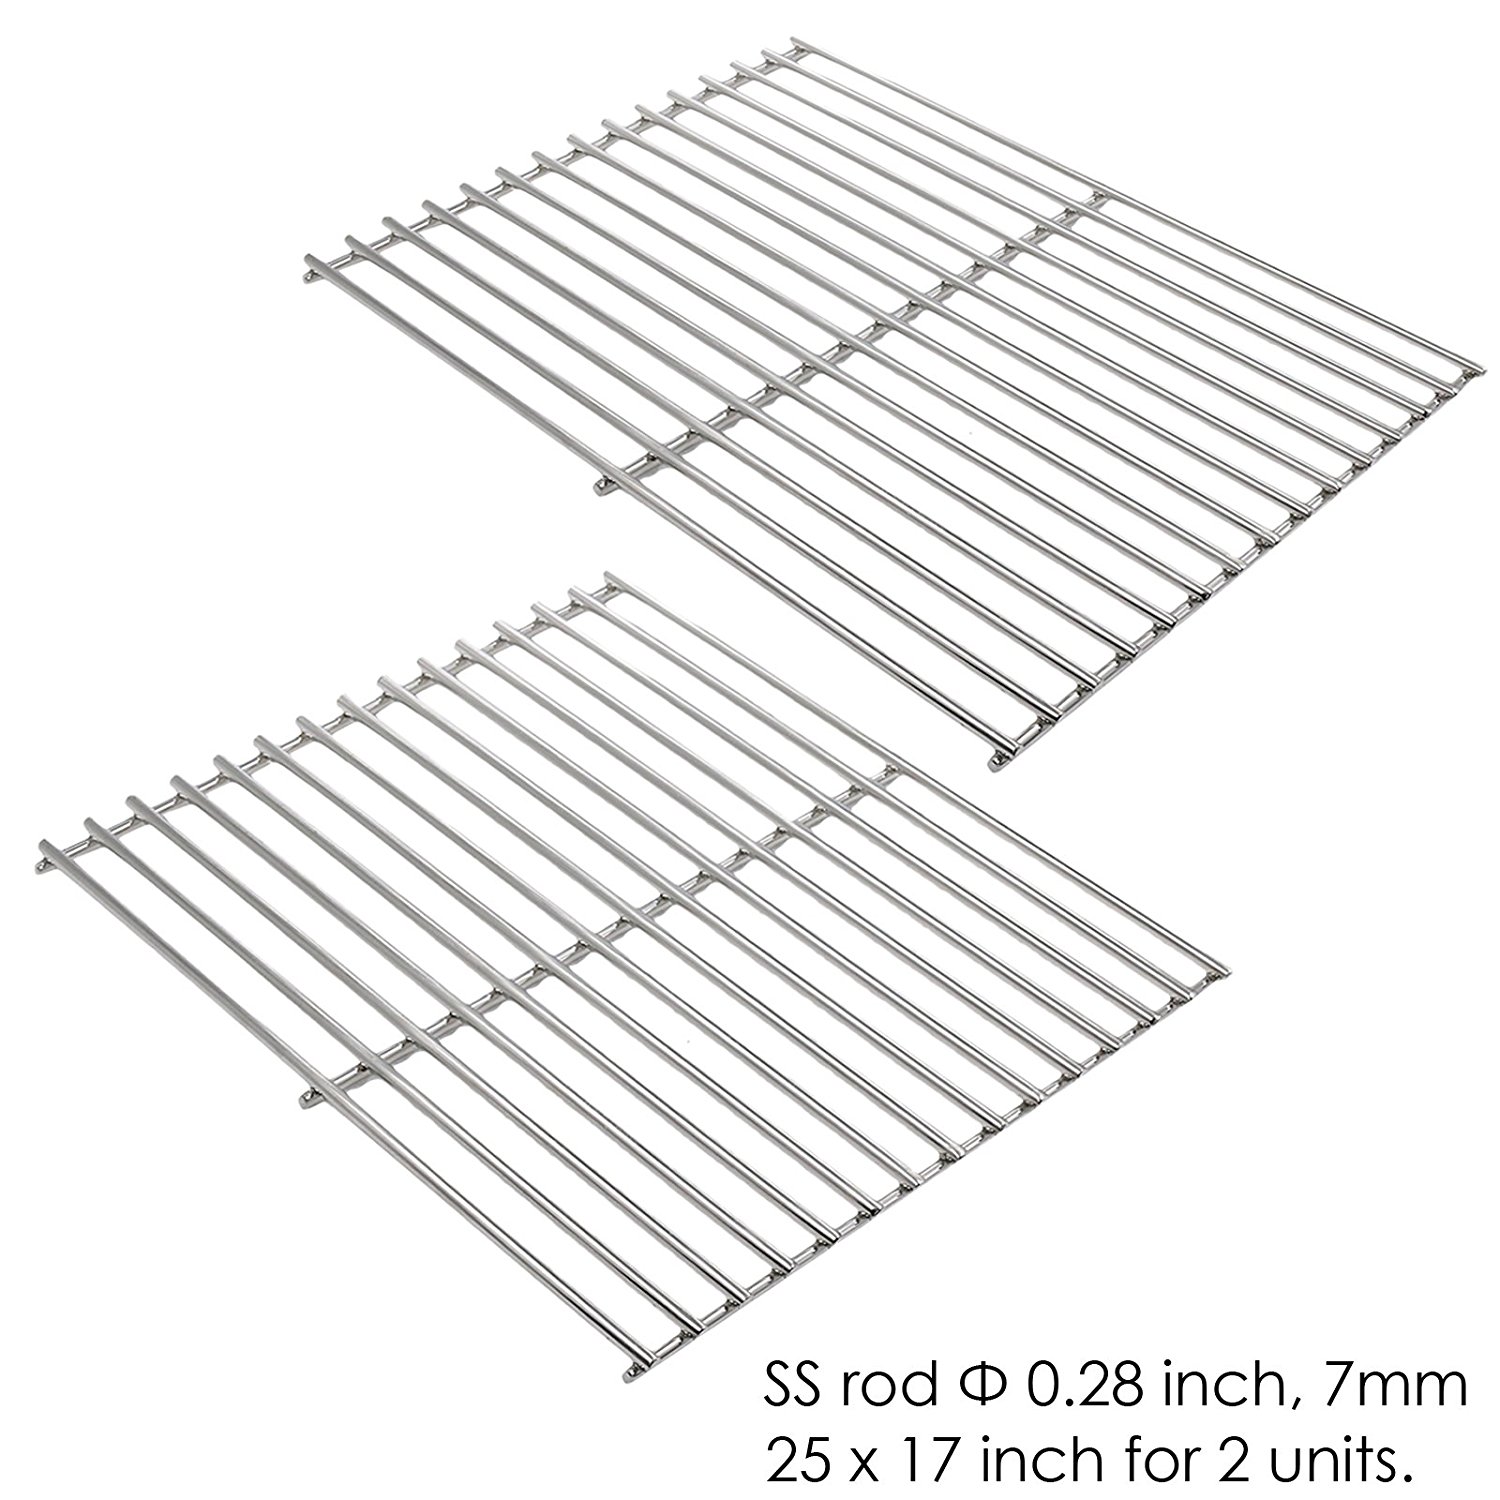 Hisencn Stainless Steel Solid Rod Cooking Grates Parts for Sunbeam Grill Mast... 